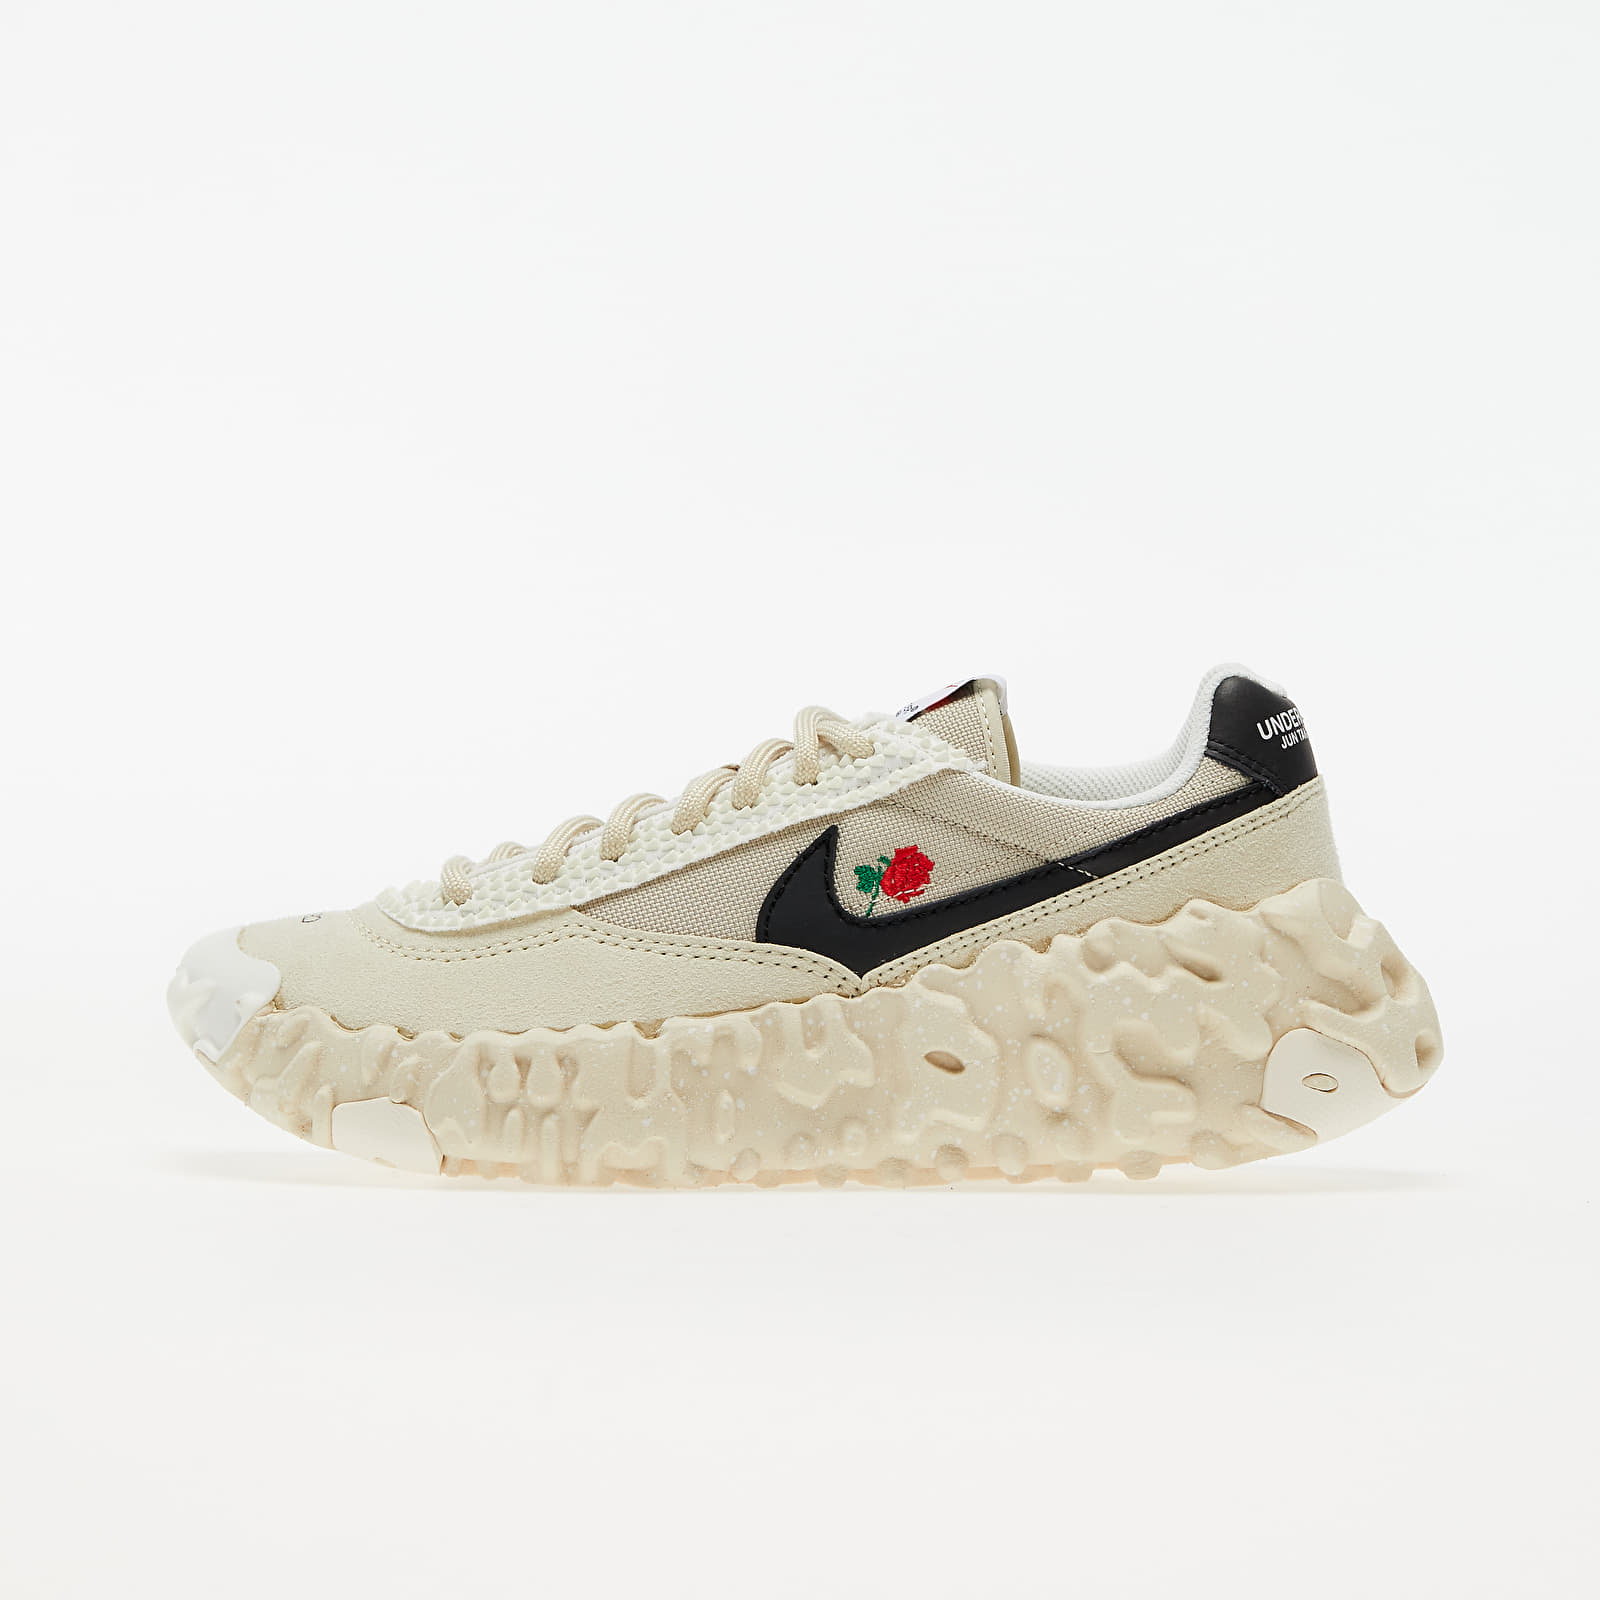 Men's shoes Nike x Undercover Overbreak Overcast/ Black-Fossil-Sail